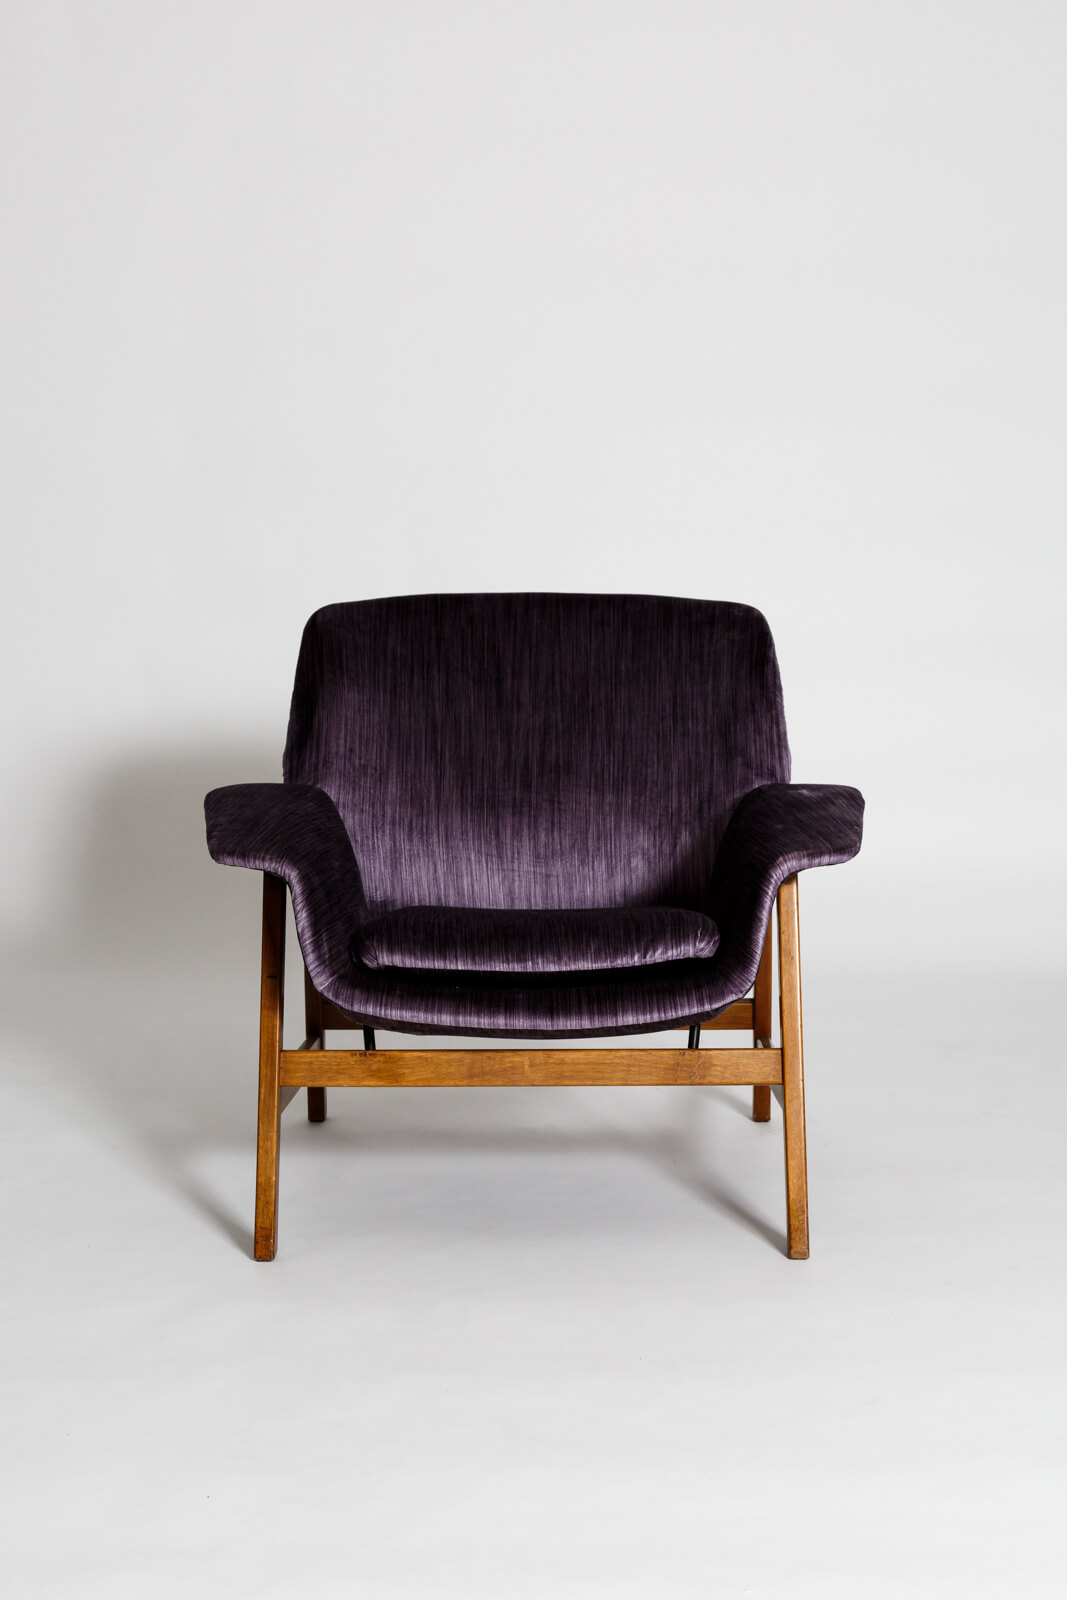 Armchair model 849 by Gianfranco Frattini for sale